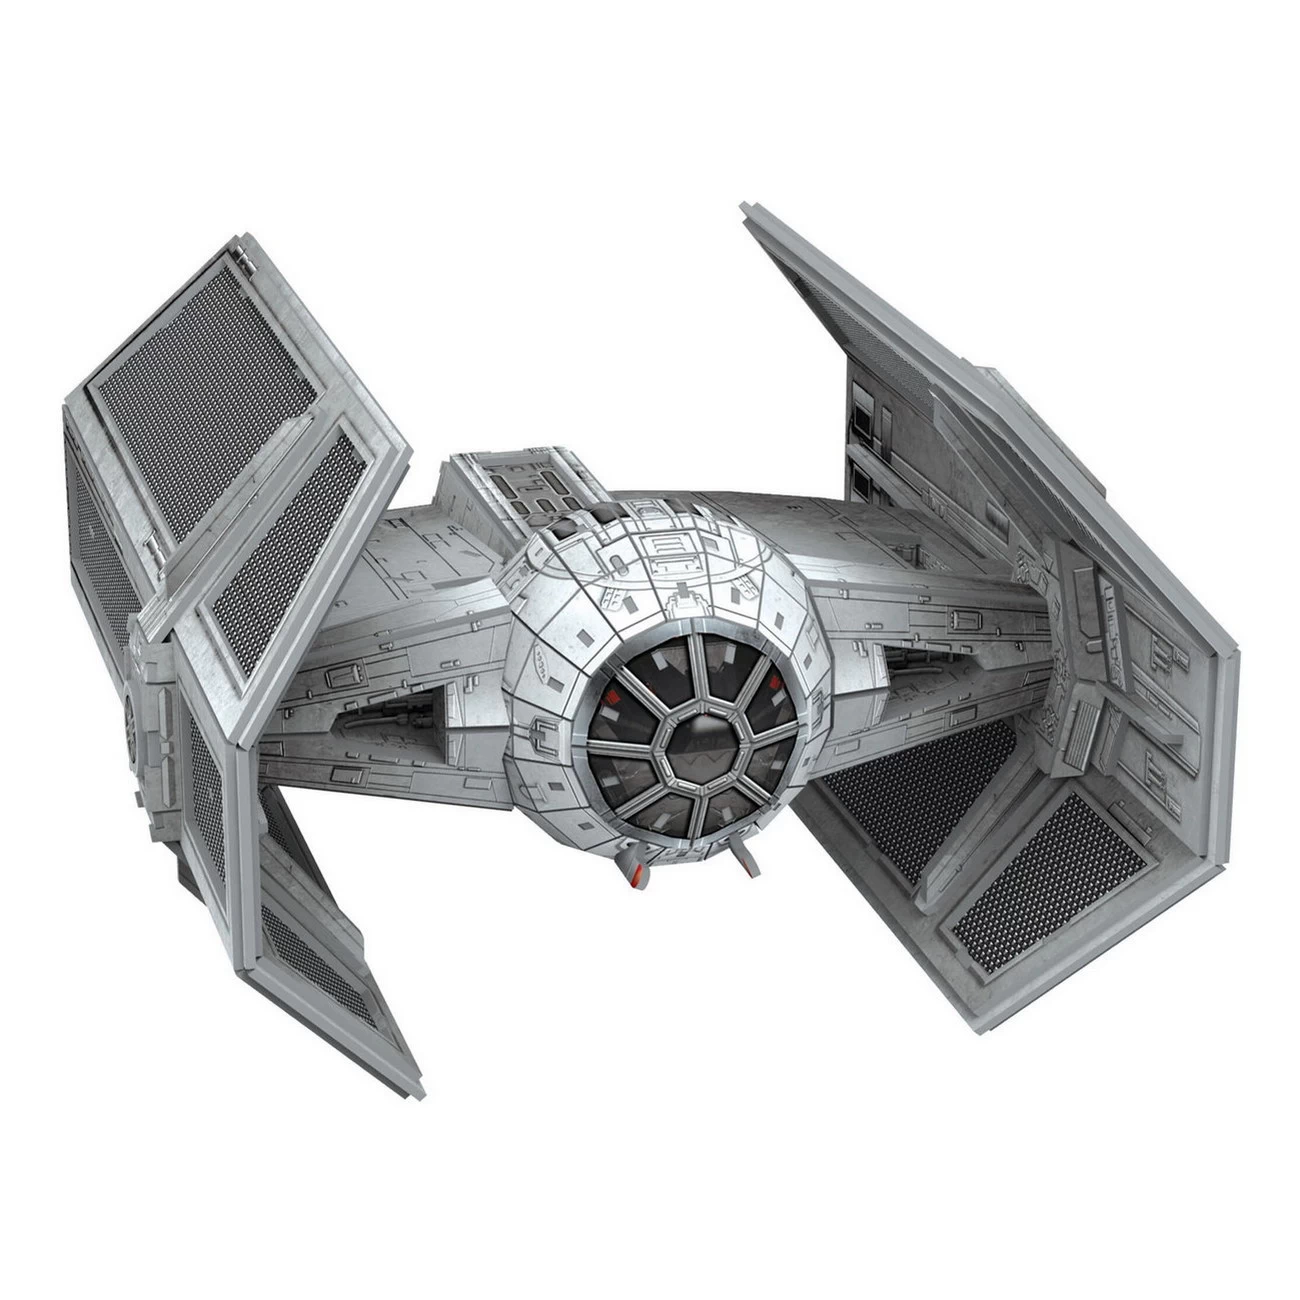 Revell 00318 - Star Wars Imperial TIE Advanced X1 - 3D Puzzle